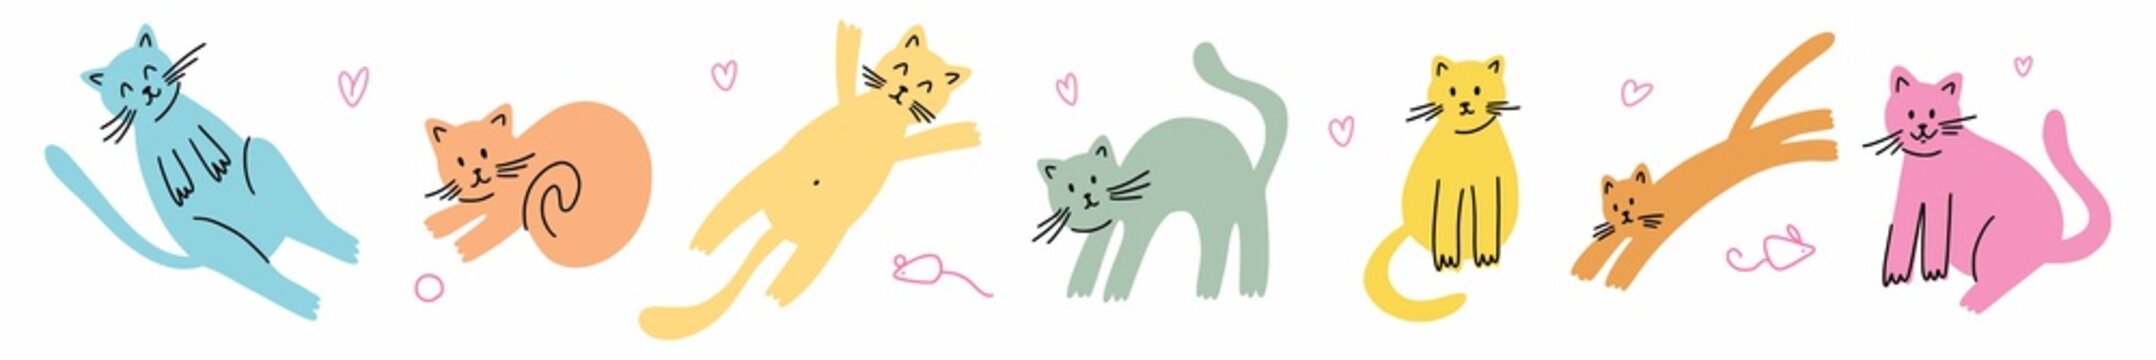 An illustration with cats drawn by hand in the style of a doodle